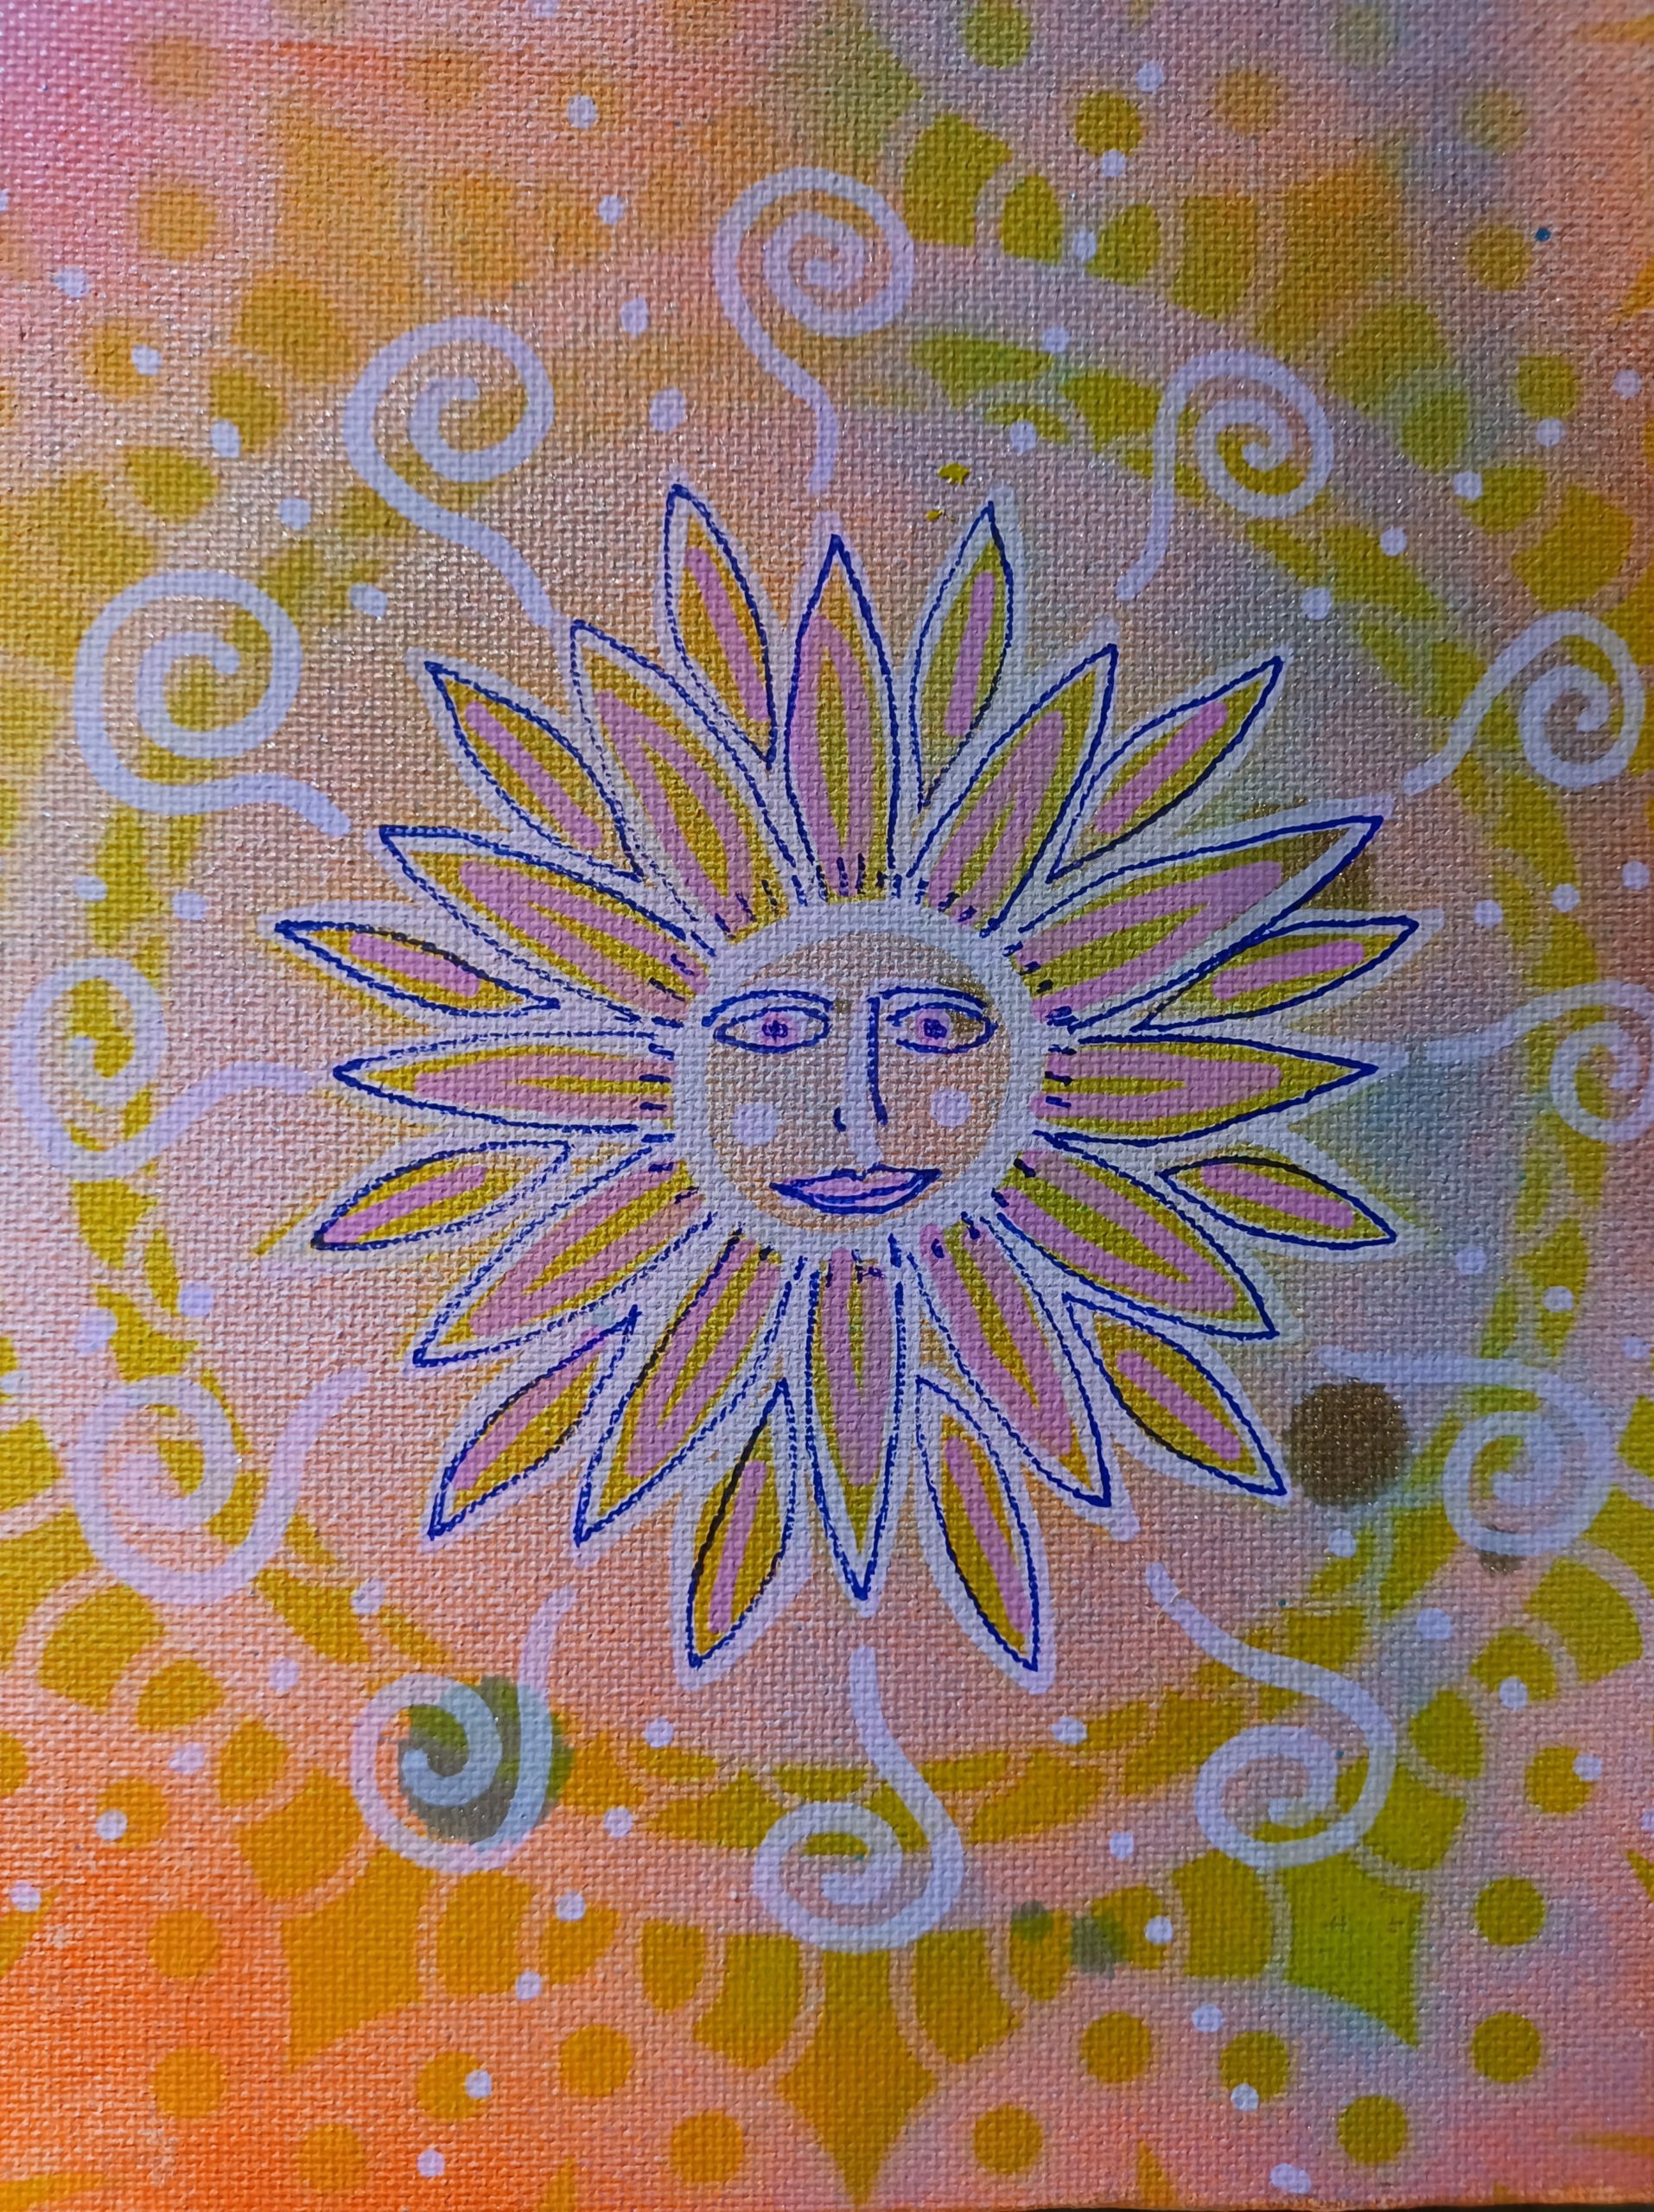 This painting has a background created with spray paint and a stencil that makes a repeating mandala type pattern in yellow, green, peach and gold. Soft colors and blending. There is a sun in the middle in the style of a mandala with beams of light looking a bit like flower petals. He has a contented look on his face drawn and thin blue lines which also outline the petals. The sun itself is a bright happy yellow with light pink accents and outlines. The light pink lines extend between the petals and create spiral patterns on some of the gaps between the petals, or dotted lines on alternate gaps. This creates the feeling that the sun is expanding from the center as it's "light" extends to the edge of the canvas